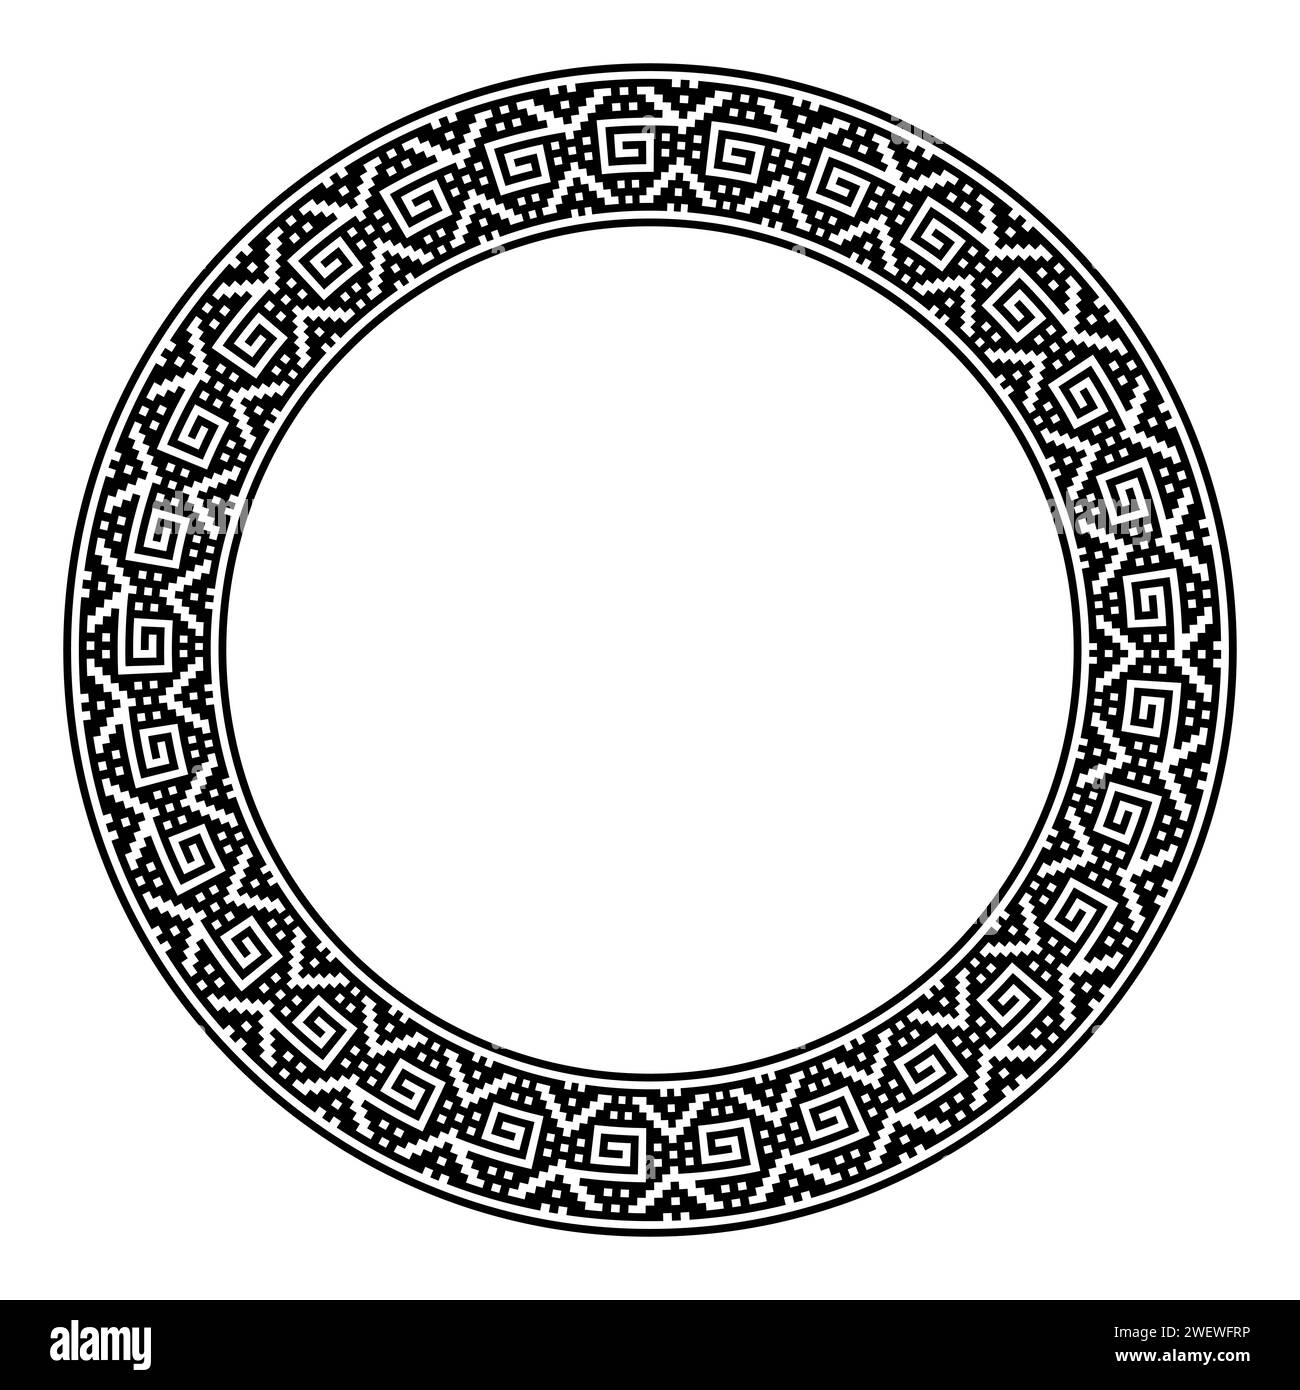 Stepped spiral motif, circle frame. Decorative circular border, in ancient stepped Inca style with angular spirals. Black and white illustration. Stock Photo